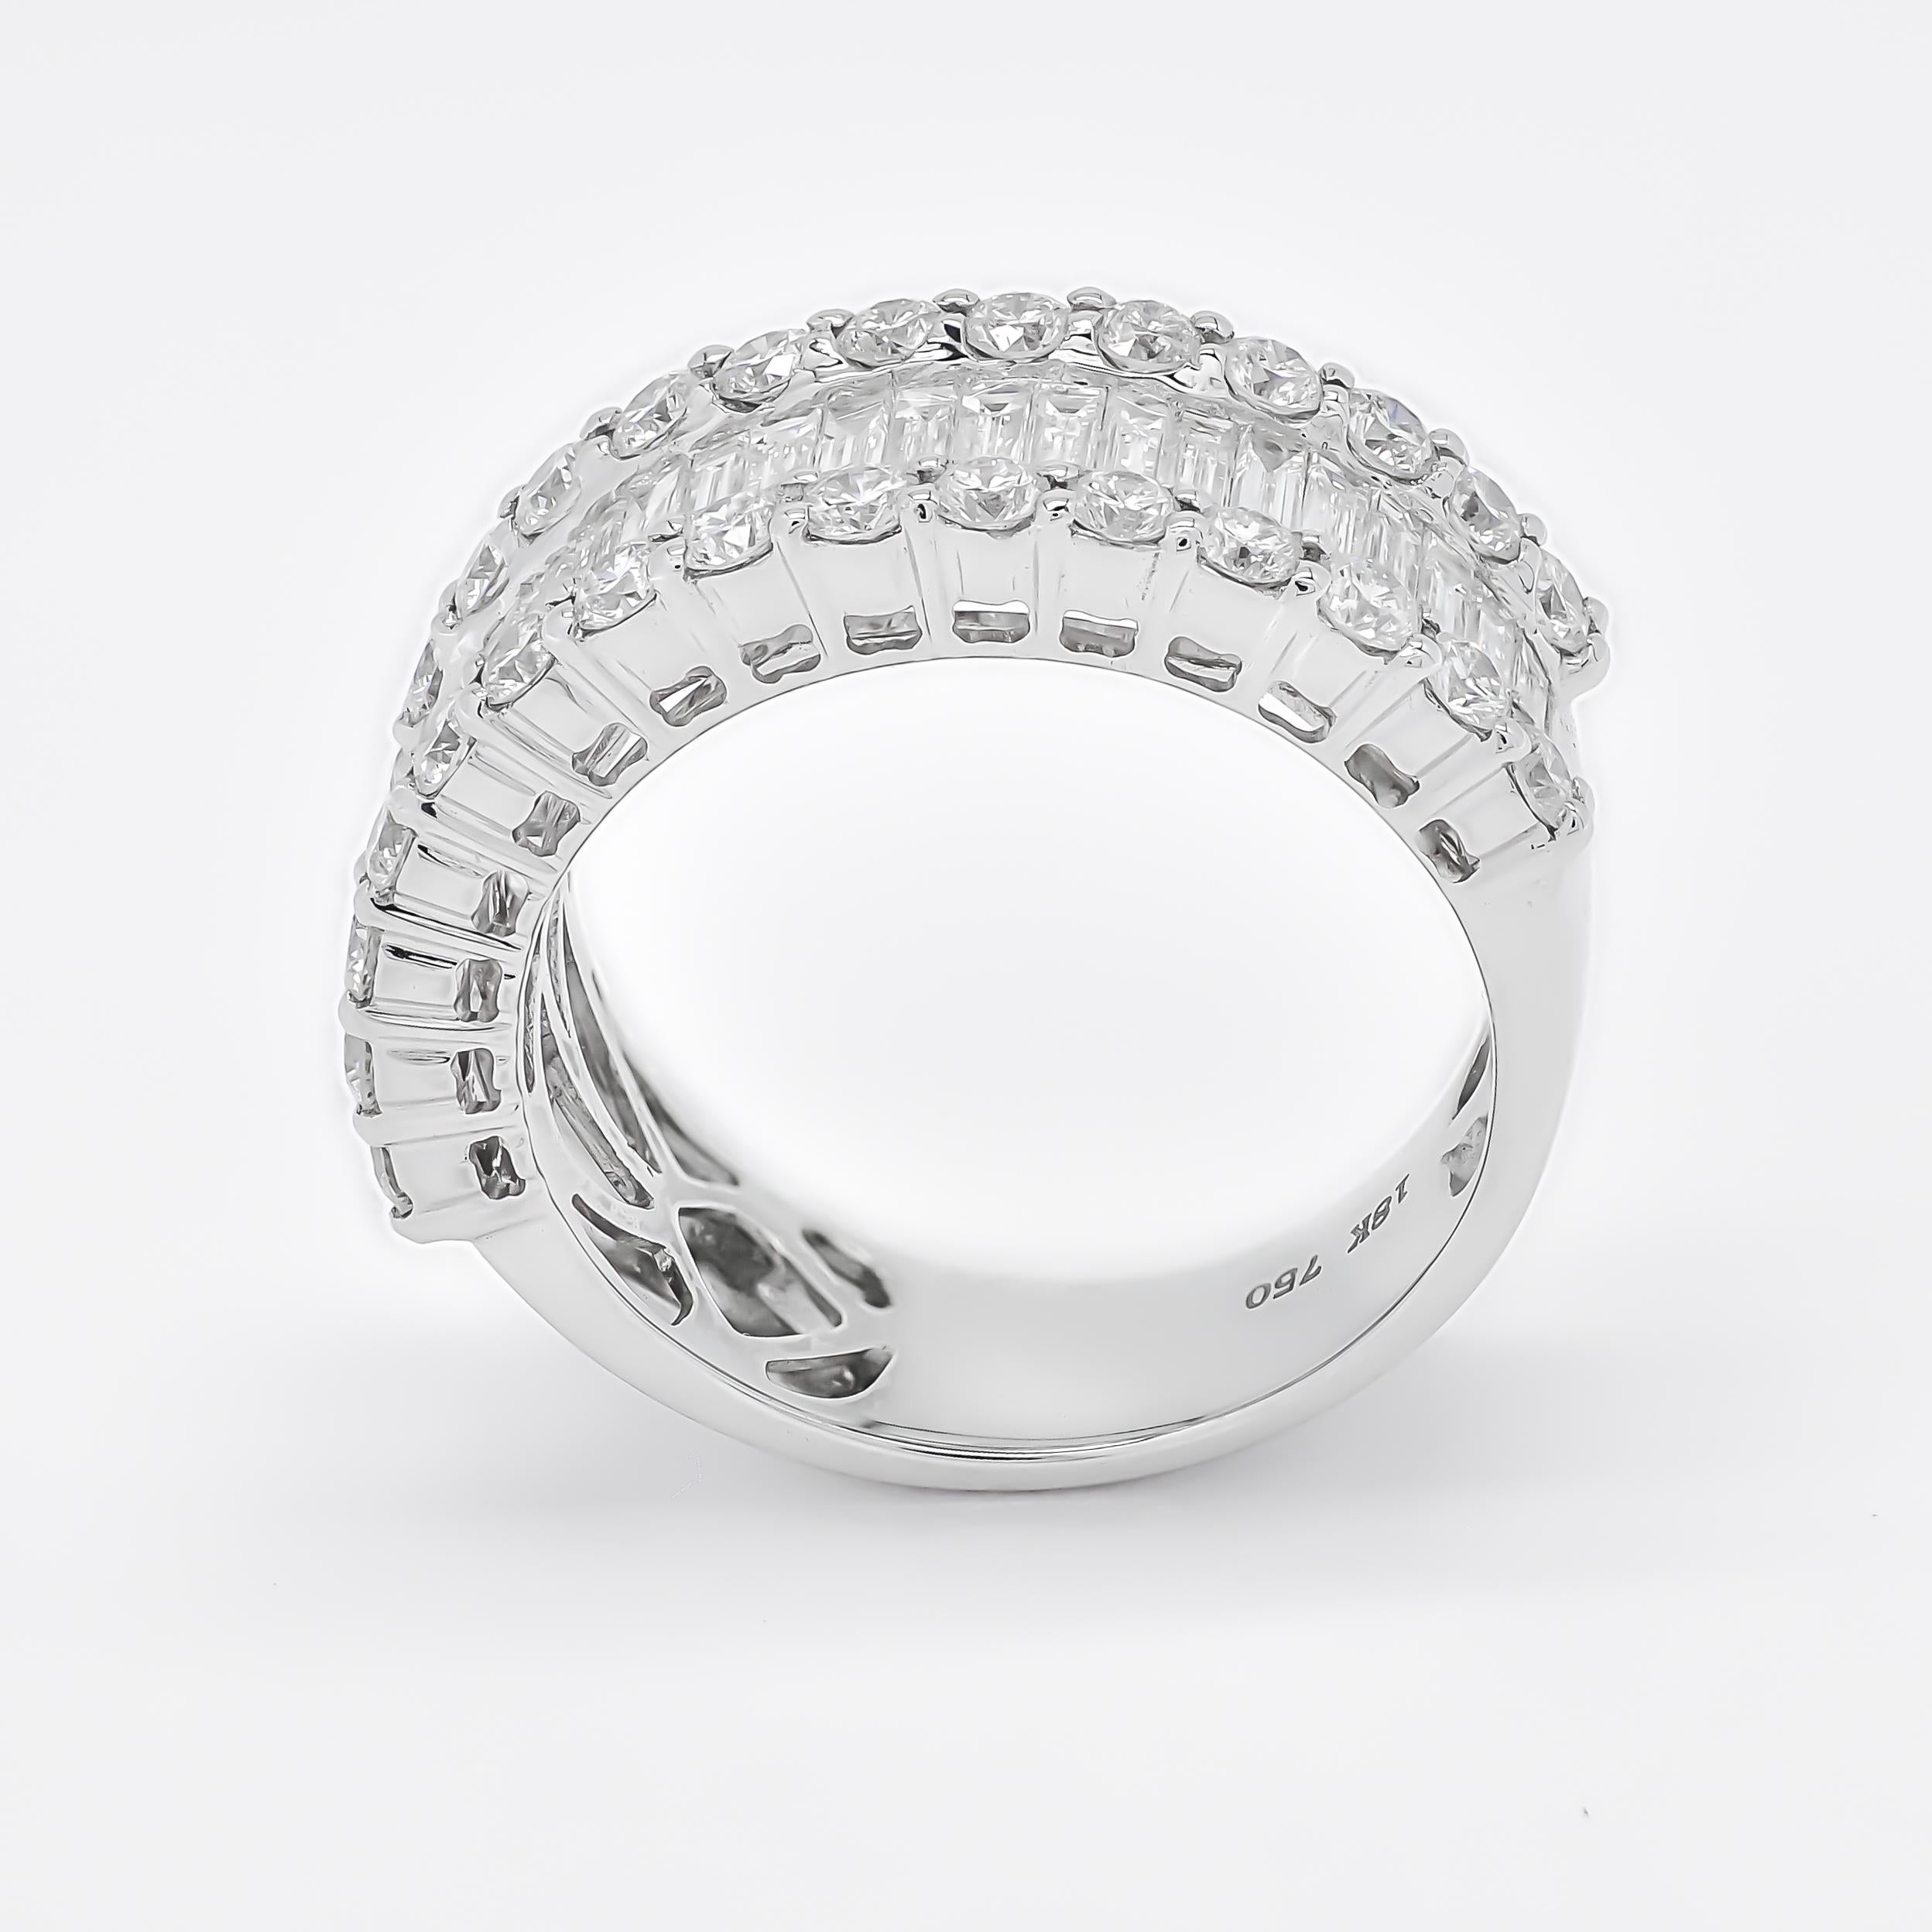 For Sale:  Natural Diamonds ct 2.30 18KT White Gold Cocktail Half Eternity Ring 3